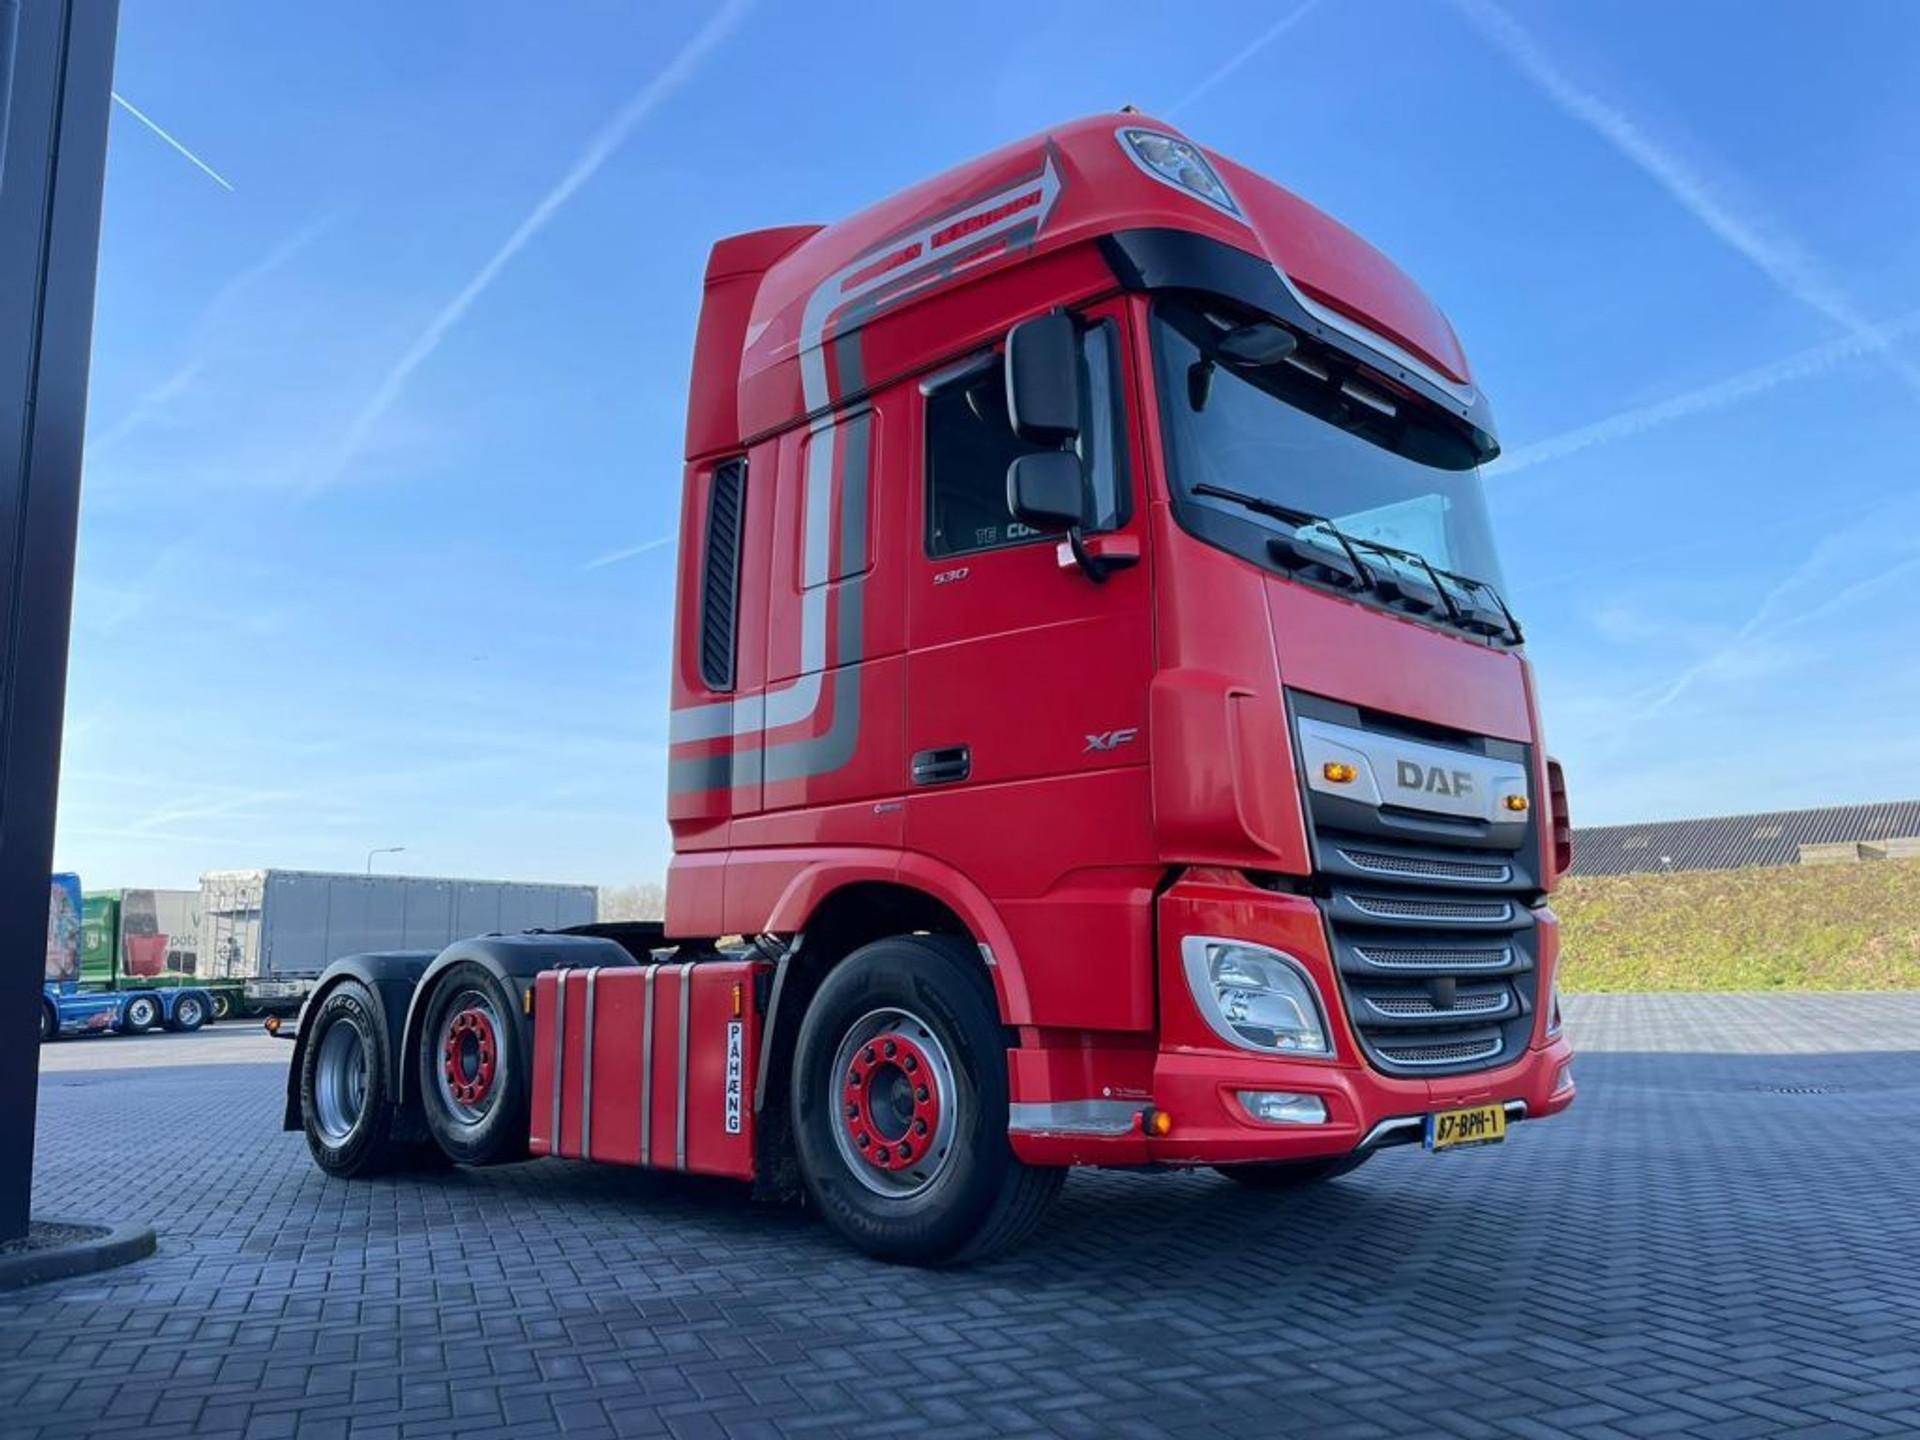 Foto 2 van DAF XF 530 SSC, 6X2/4, LEATHER SEATS, NL TRUCK, PERFECT CONDITION.